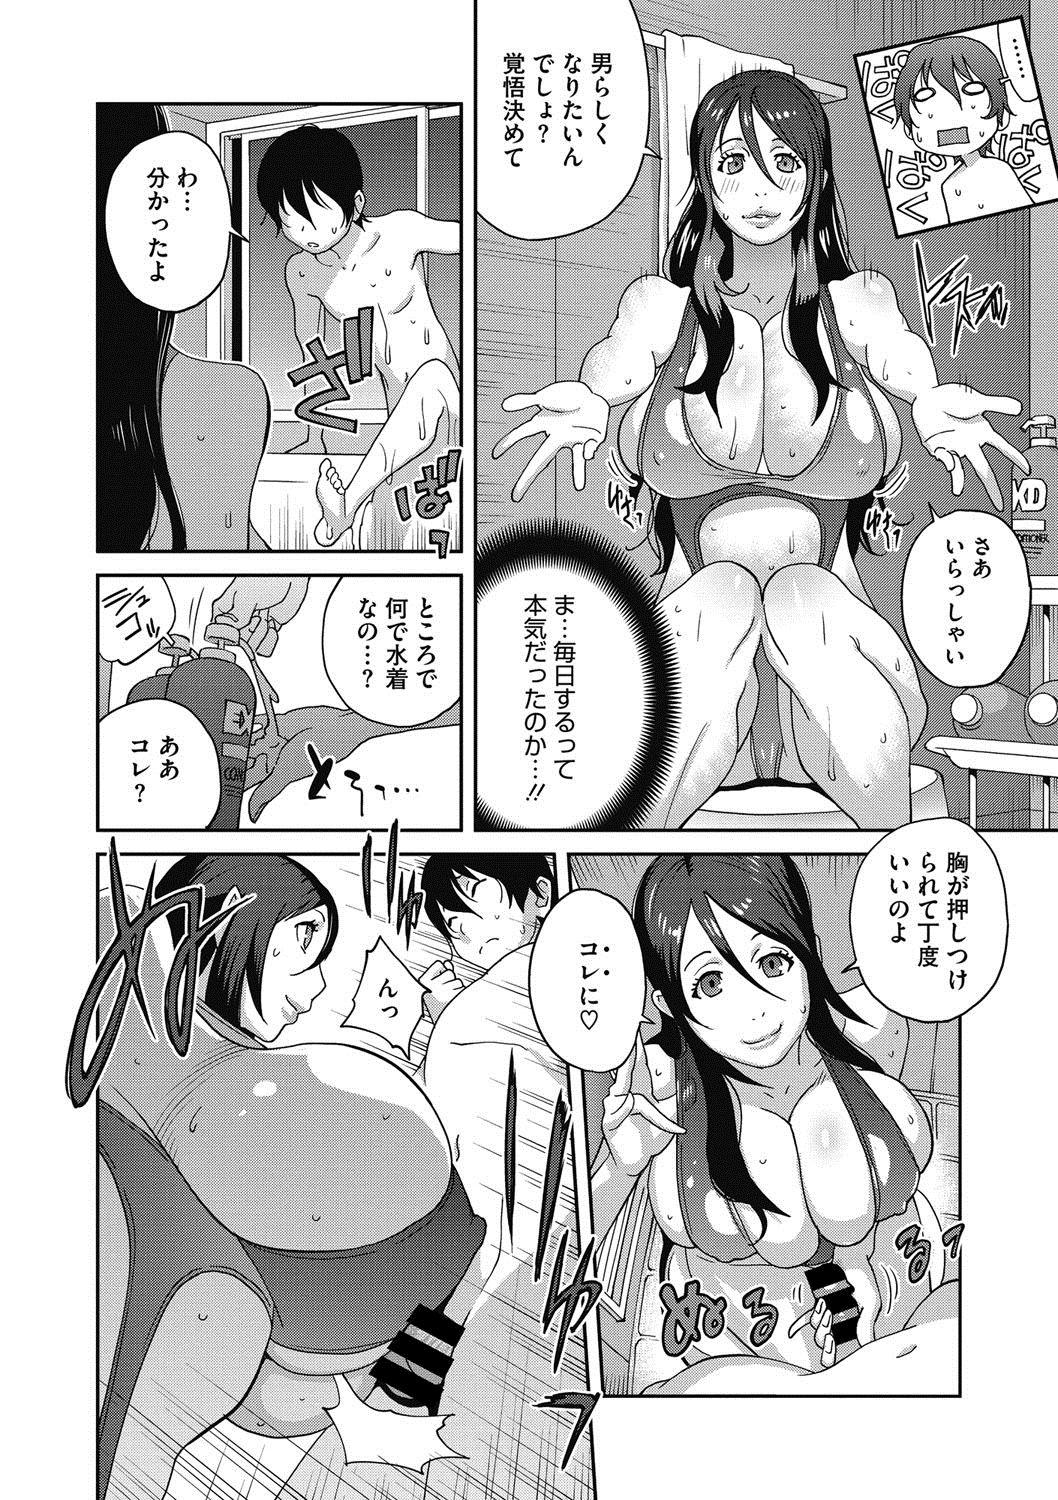 [Kotoyoshi Yumisuke] Haha to Ane to Aoi Ichigo no Fromage - Fromage of mother and an older sister and a blue strawberry Ch. 1-3 25